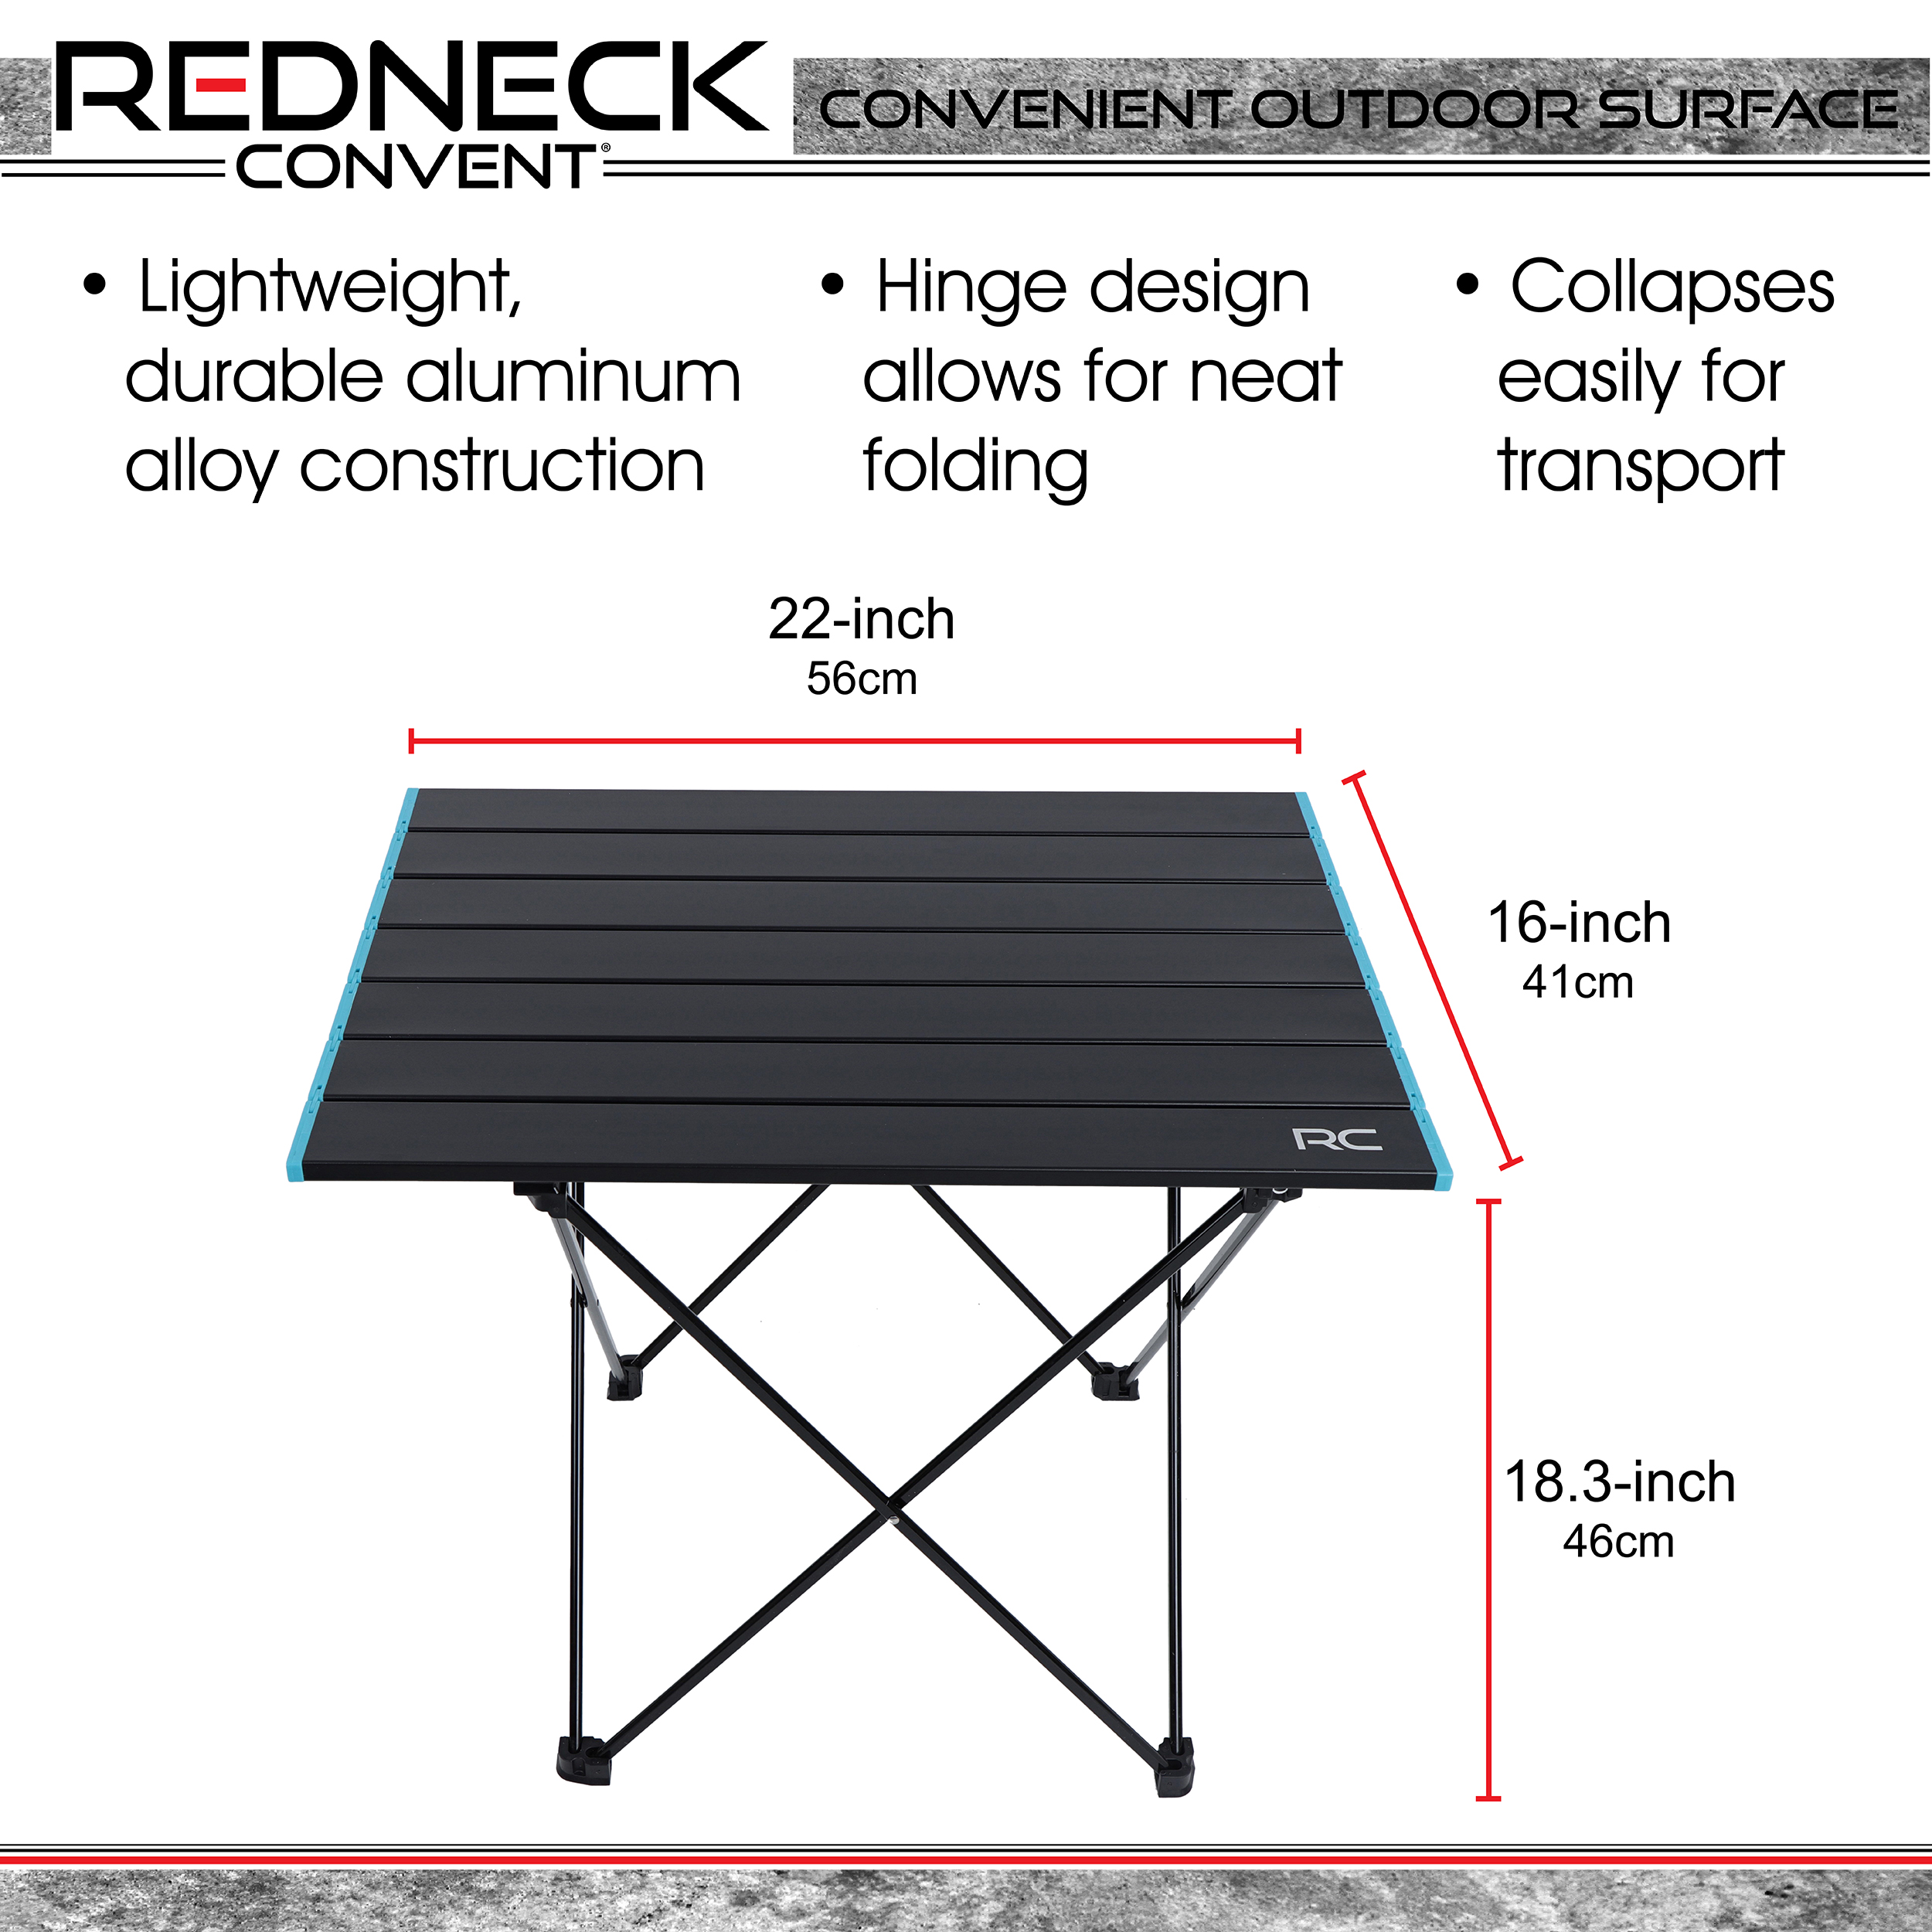 Redneck Convent Camping Table, Black - image 4 of 7